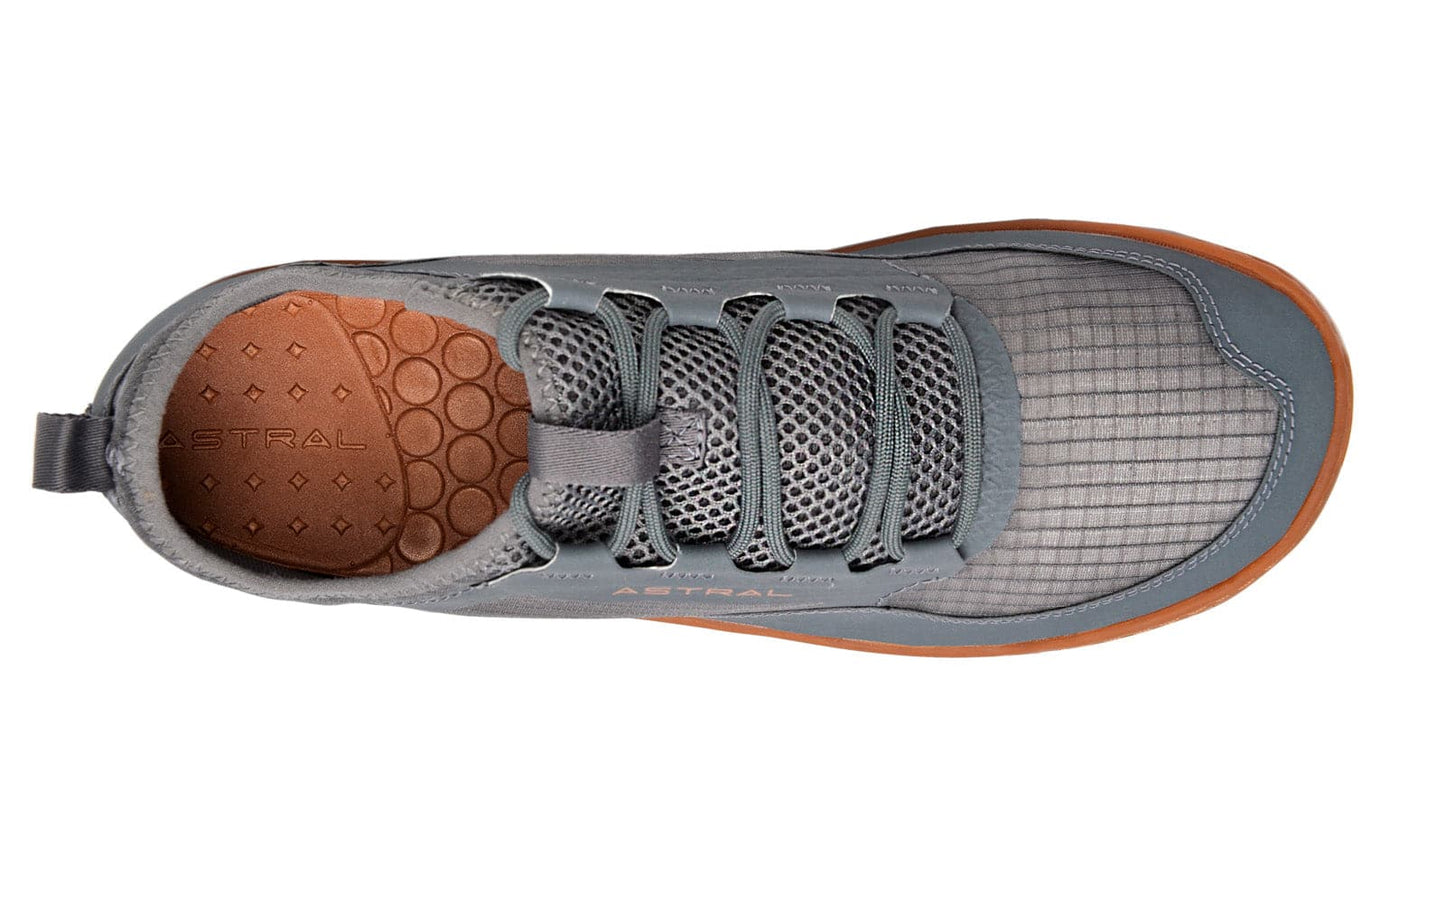 Featuring the Loyak AC - Men's men's footwear manufactured by Astral shown here from a third angle.